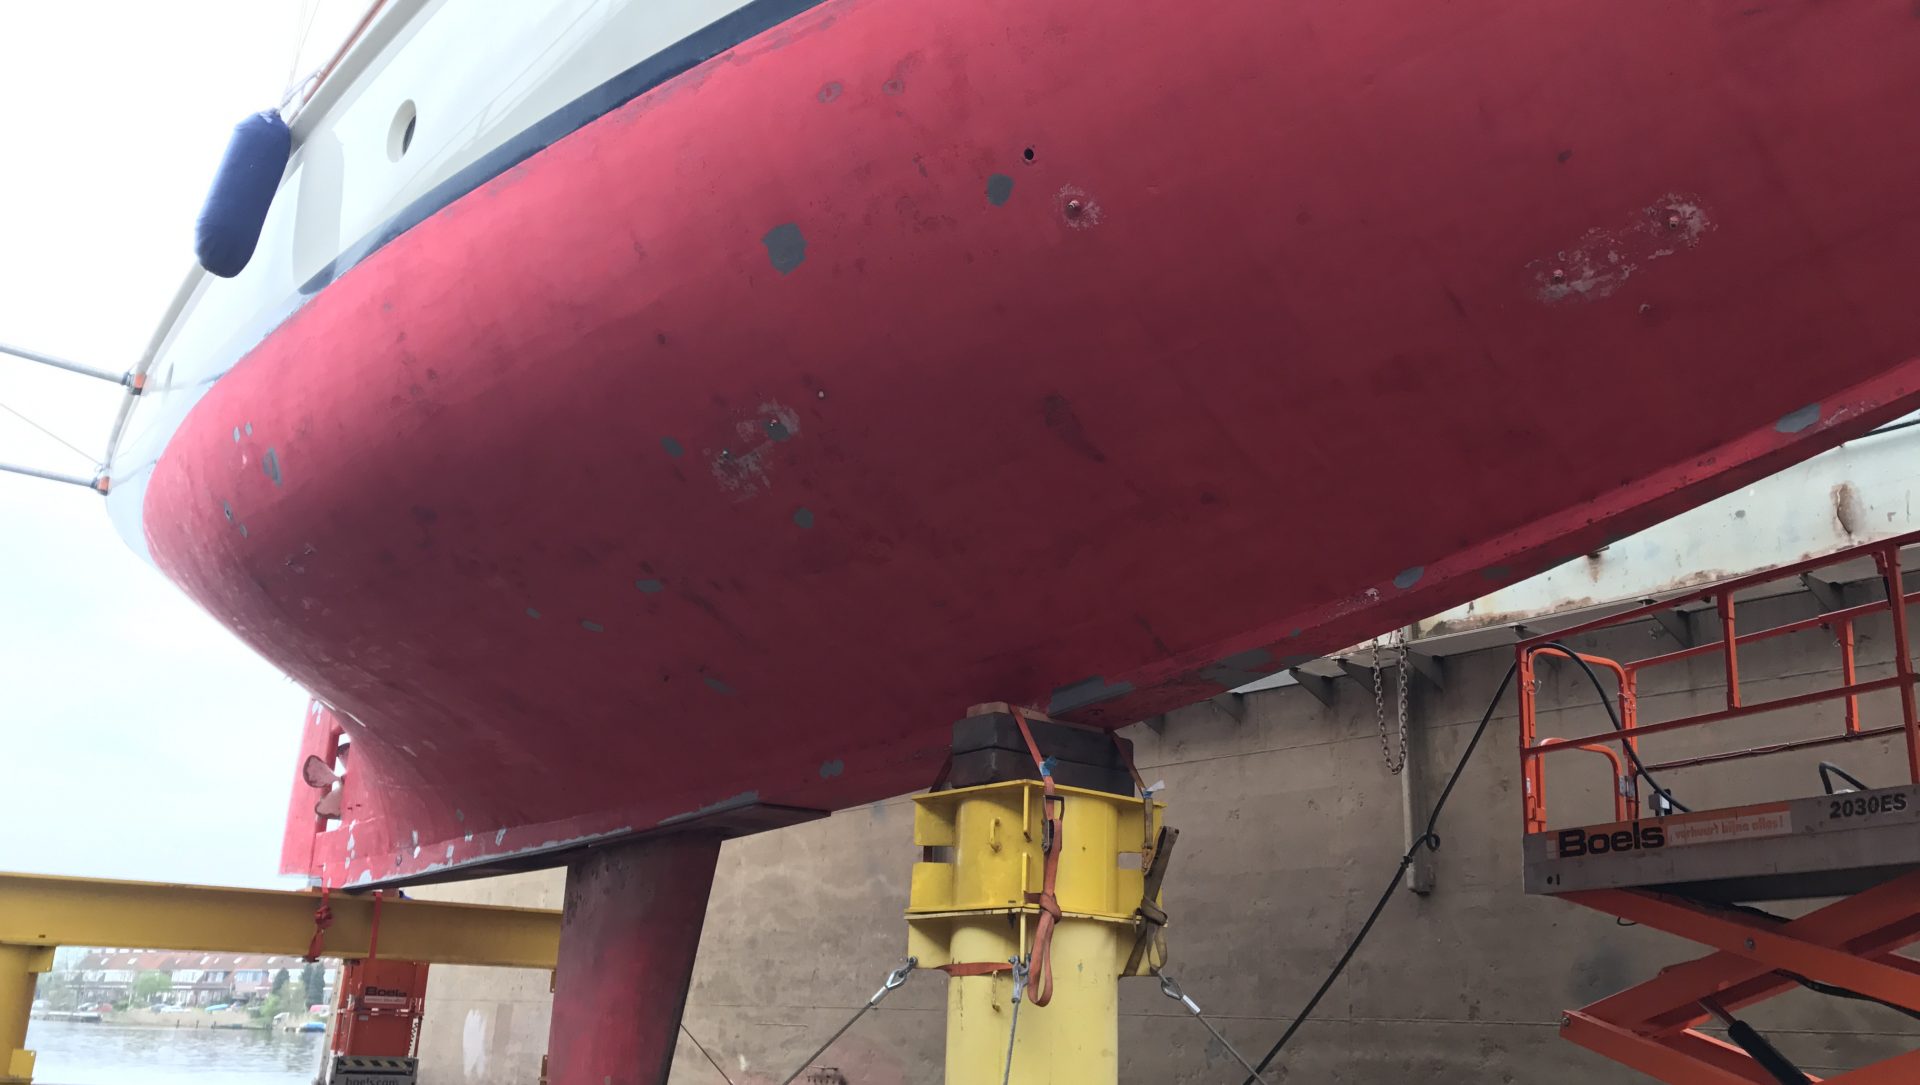 Hull inspection for yachts